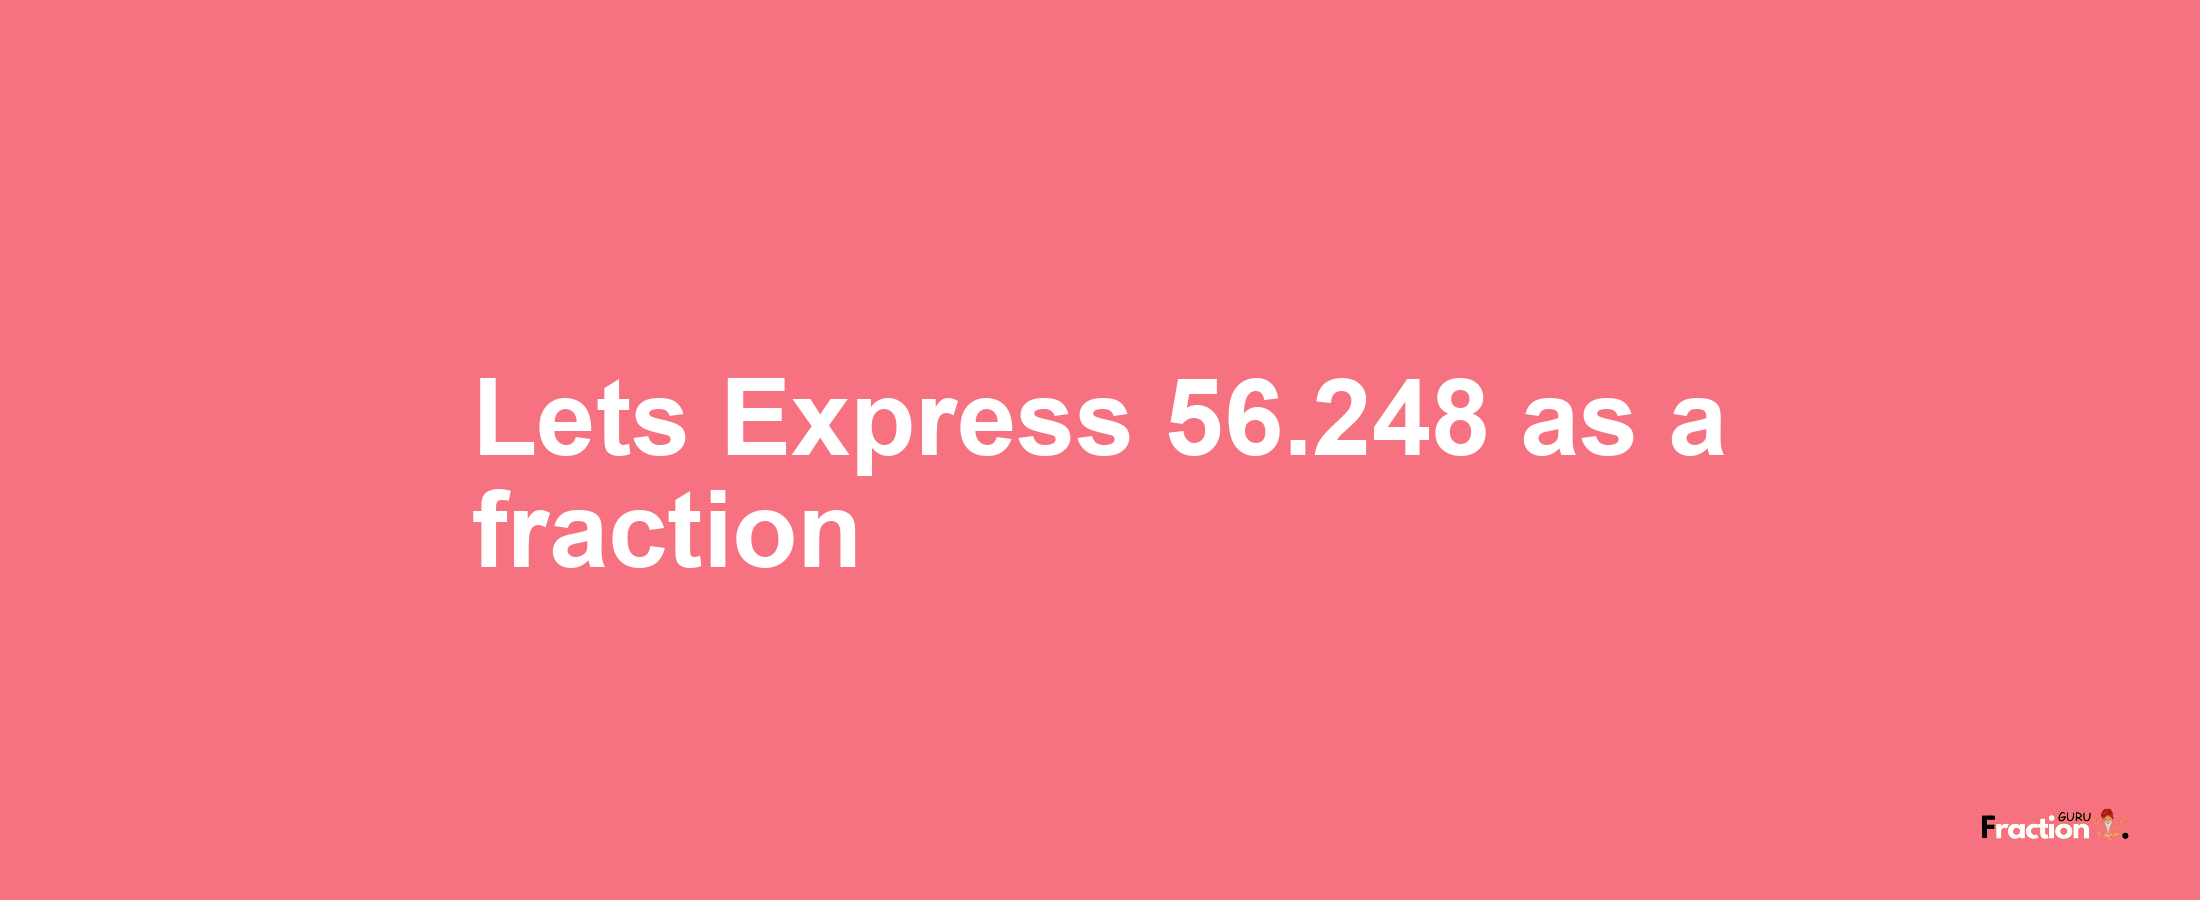 Lets Express 56.248 as afraction